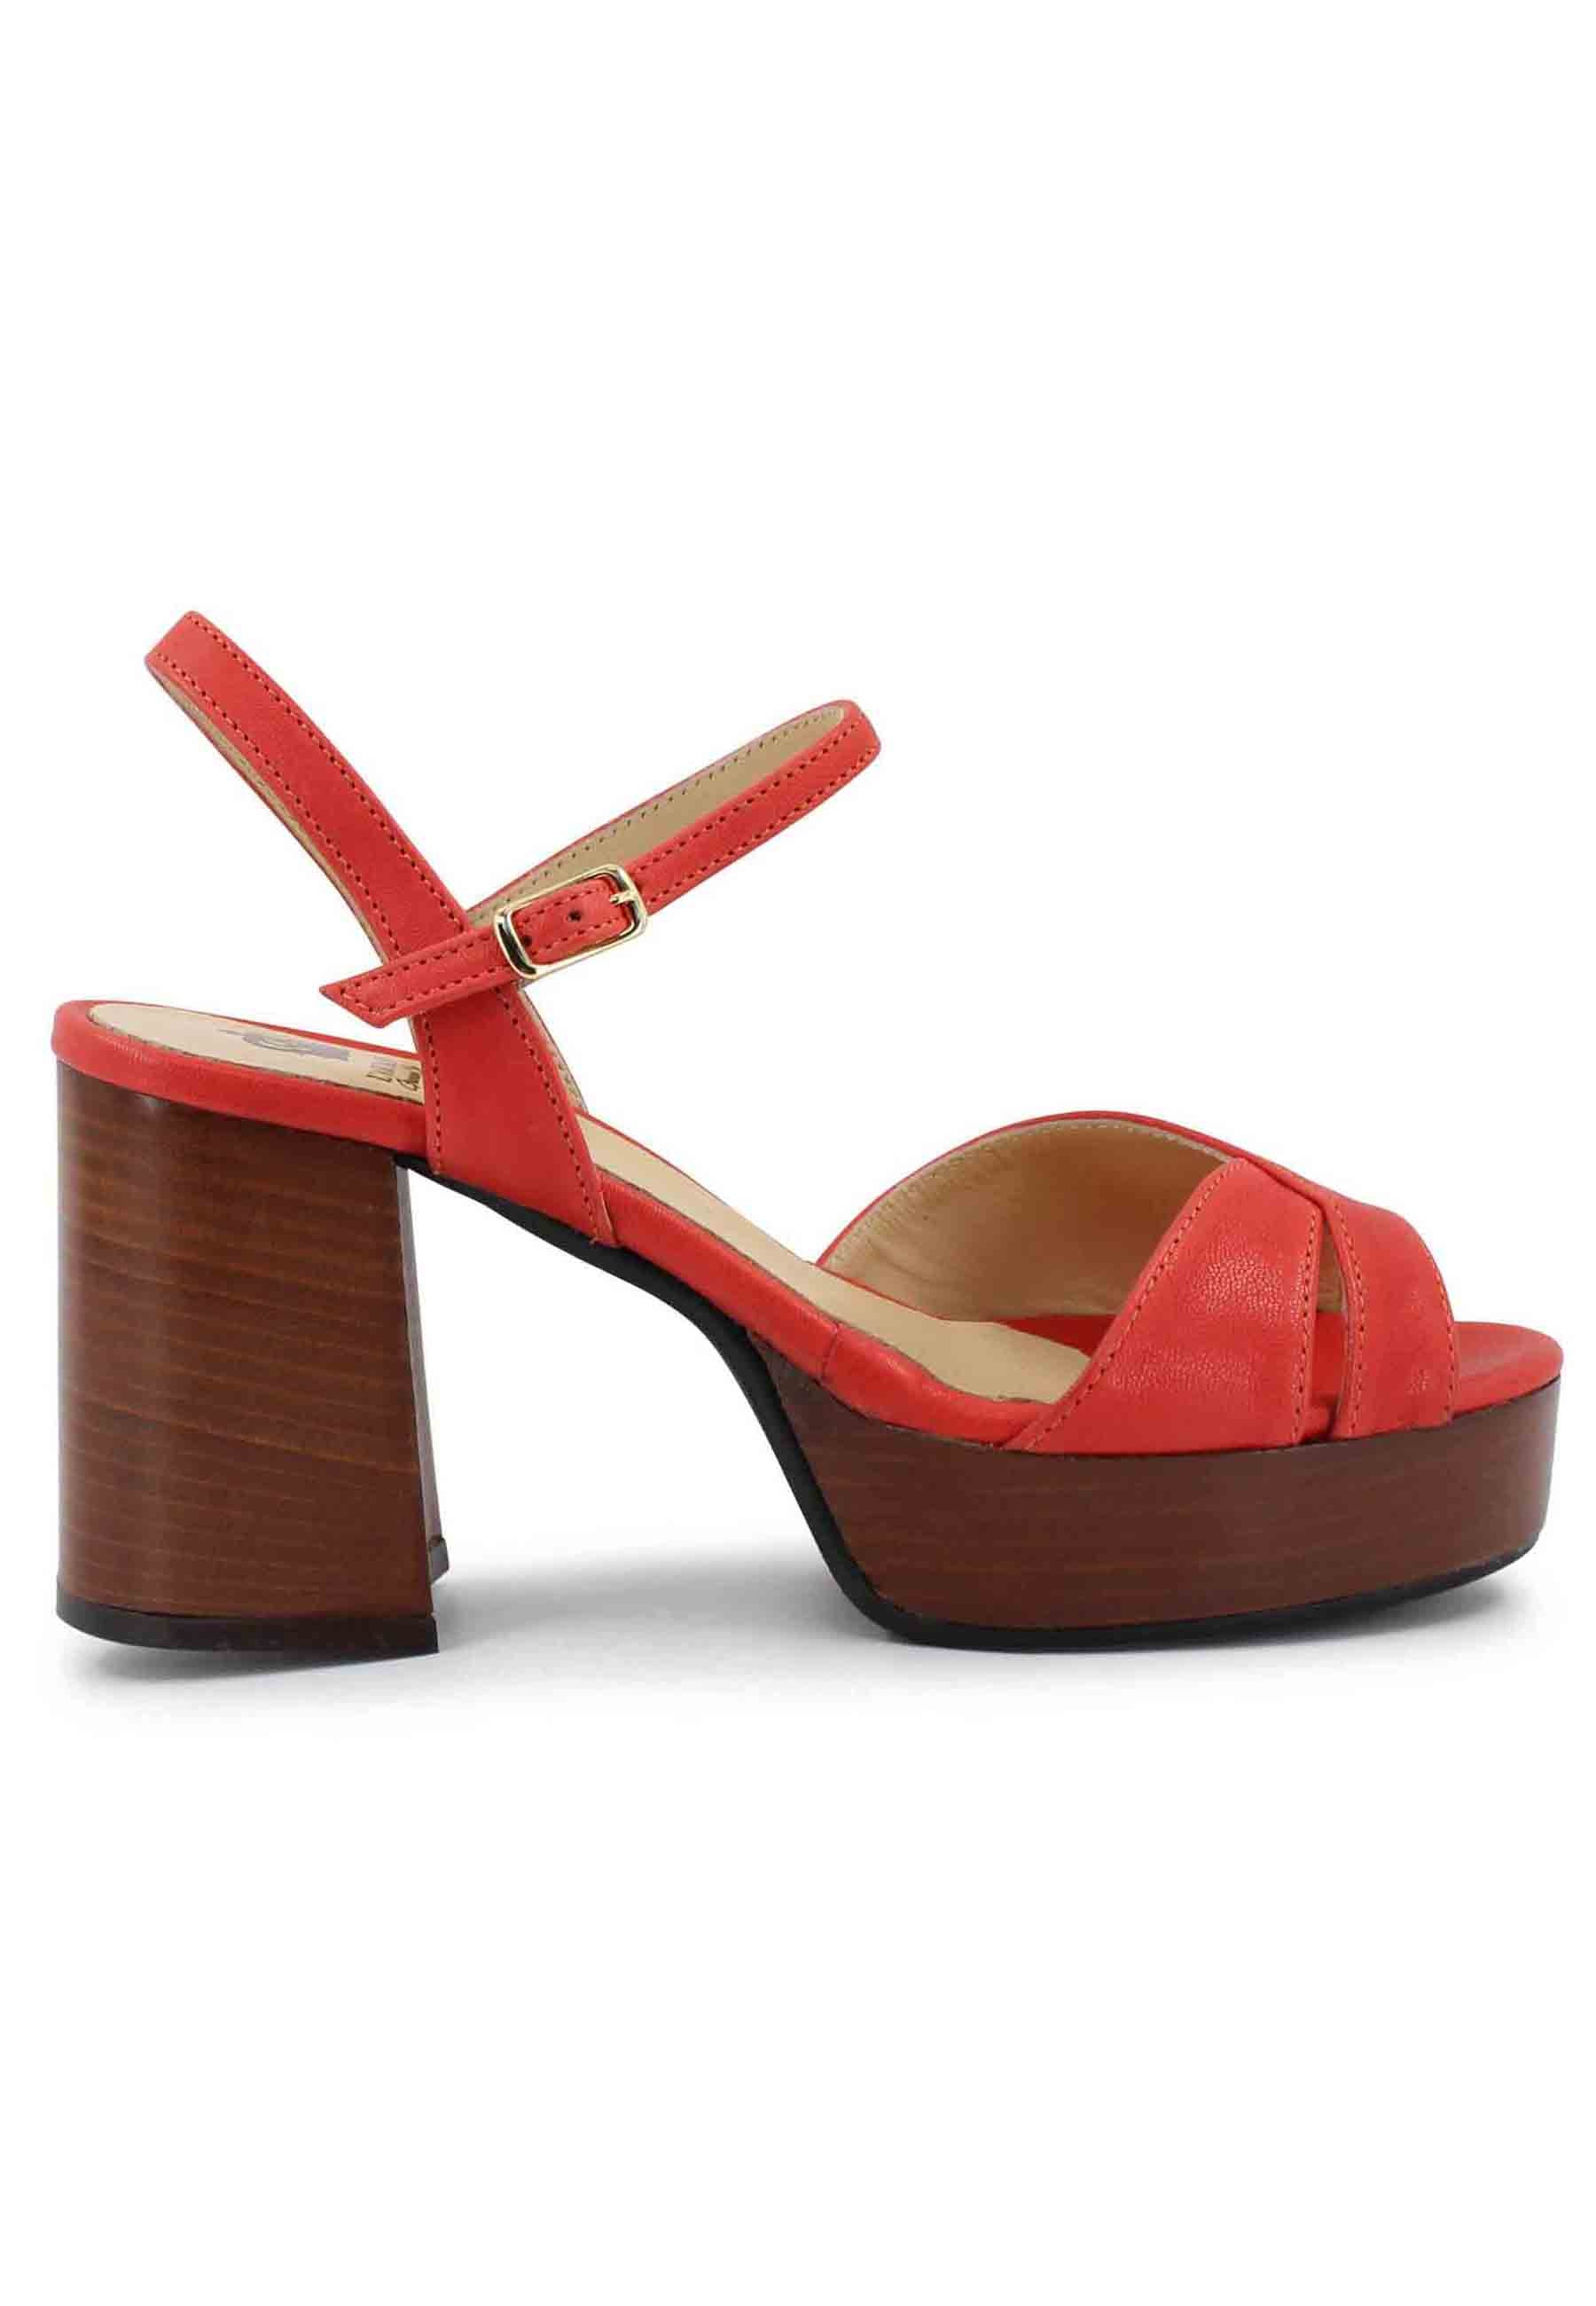 Women's red leather sandals with strap and leather heel and platform